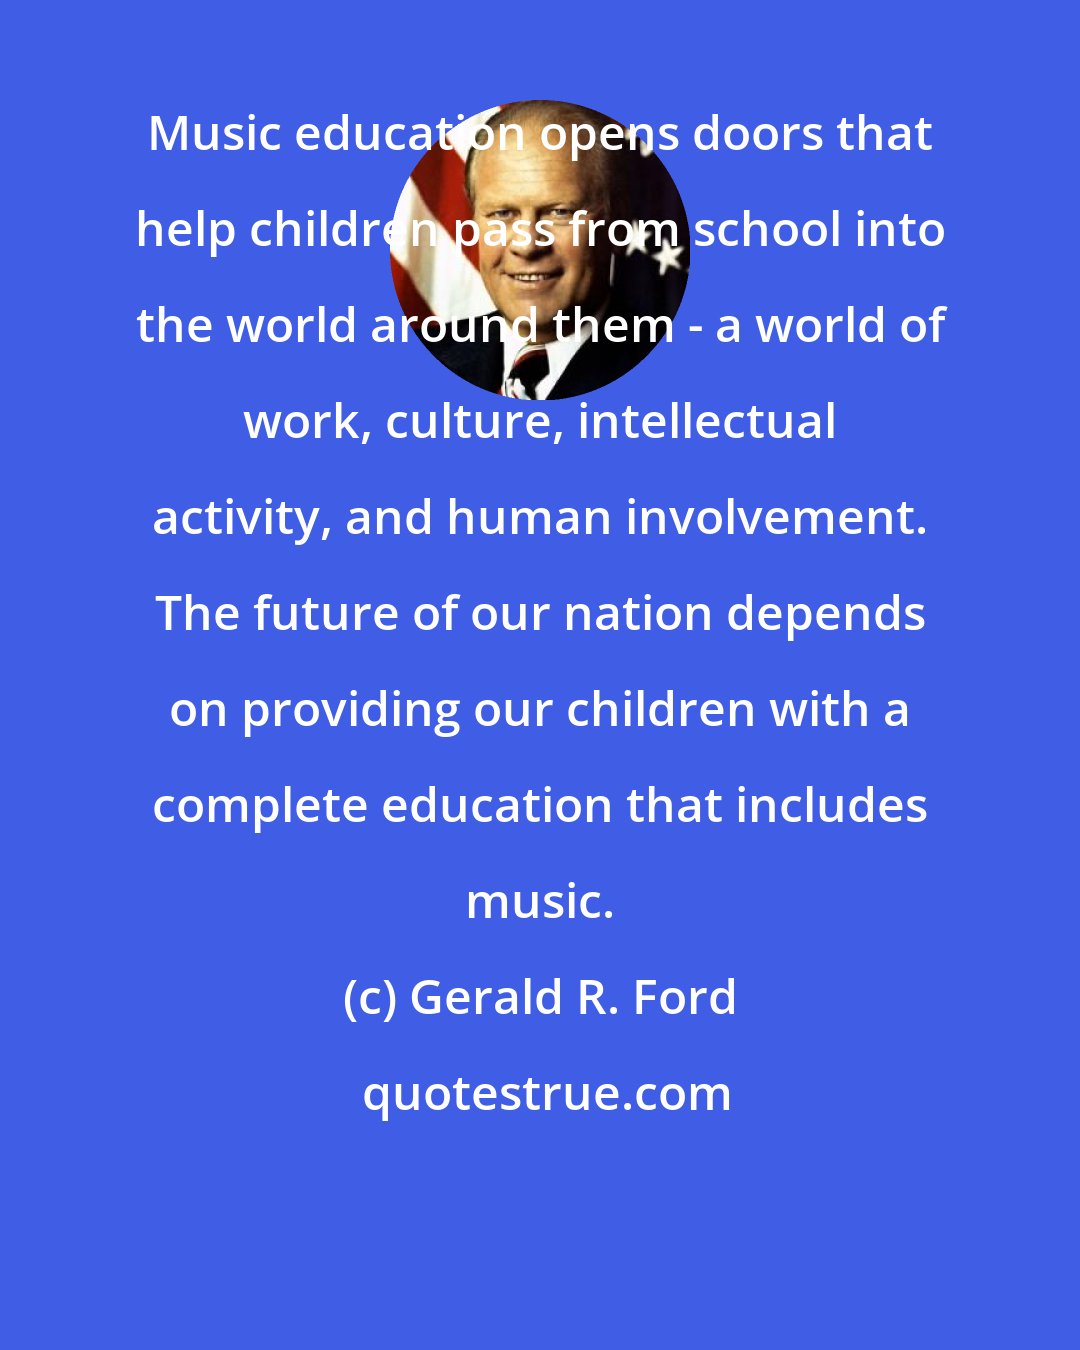 Gerald R. Ford: Music education opens doors that help children pass from school into the world around them - a world of work, culture, intellectual activity, and human involvement. The future of our nation depends on providing our children with a complete education that includes music.